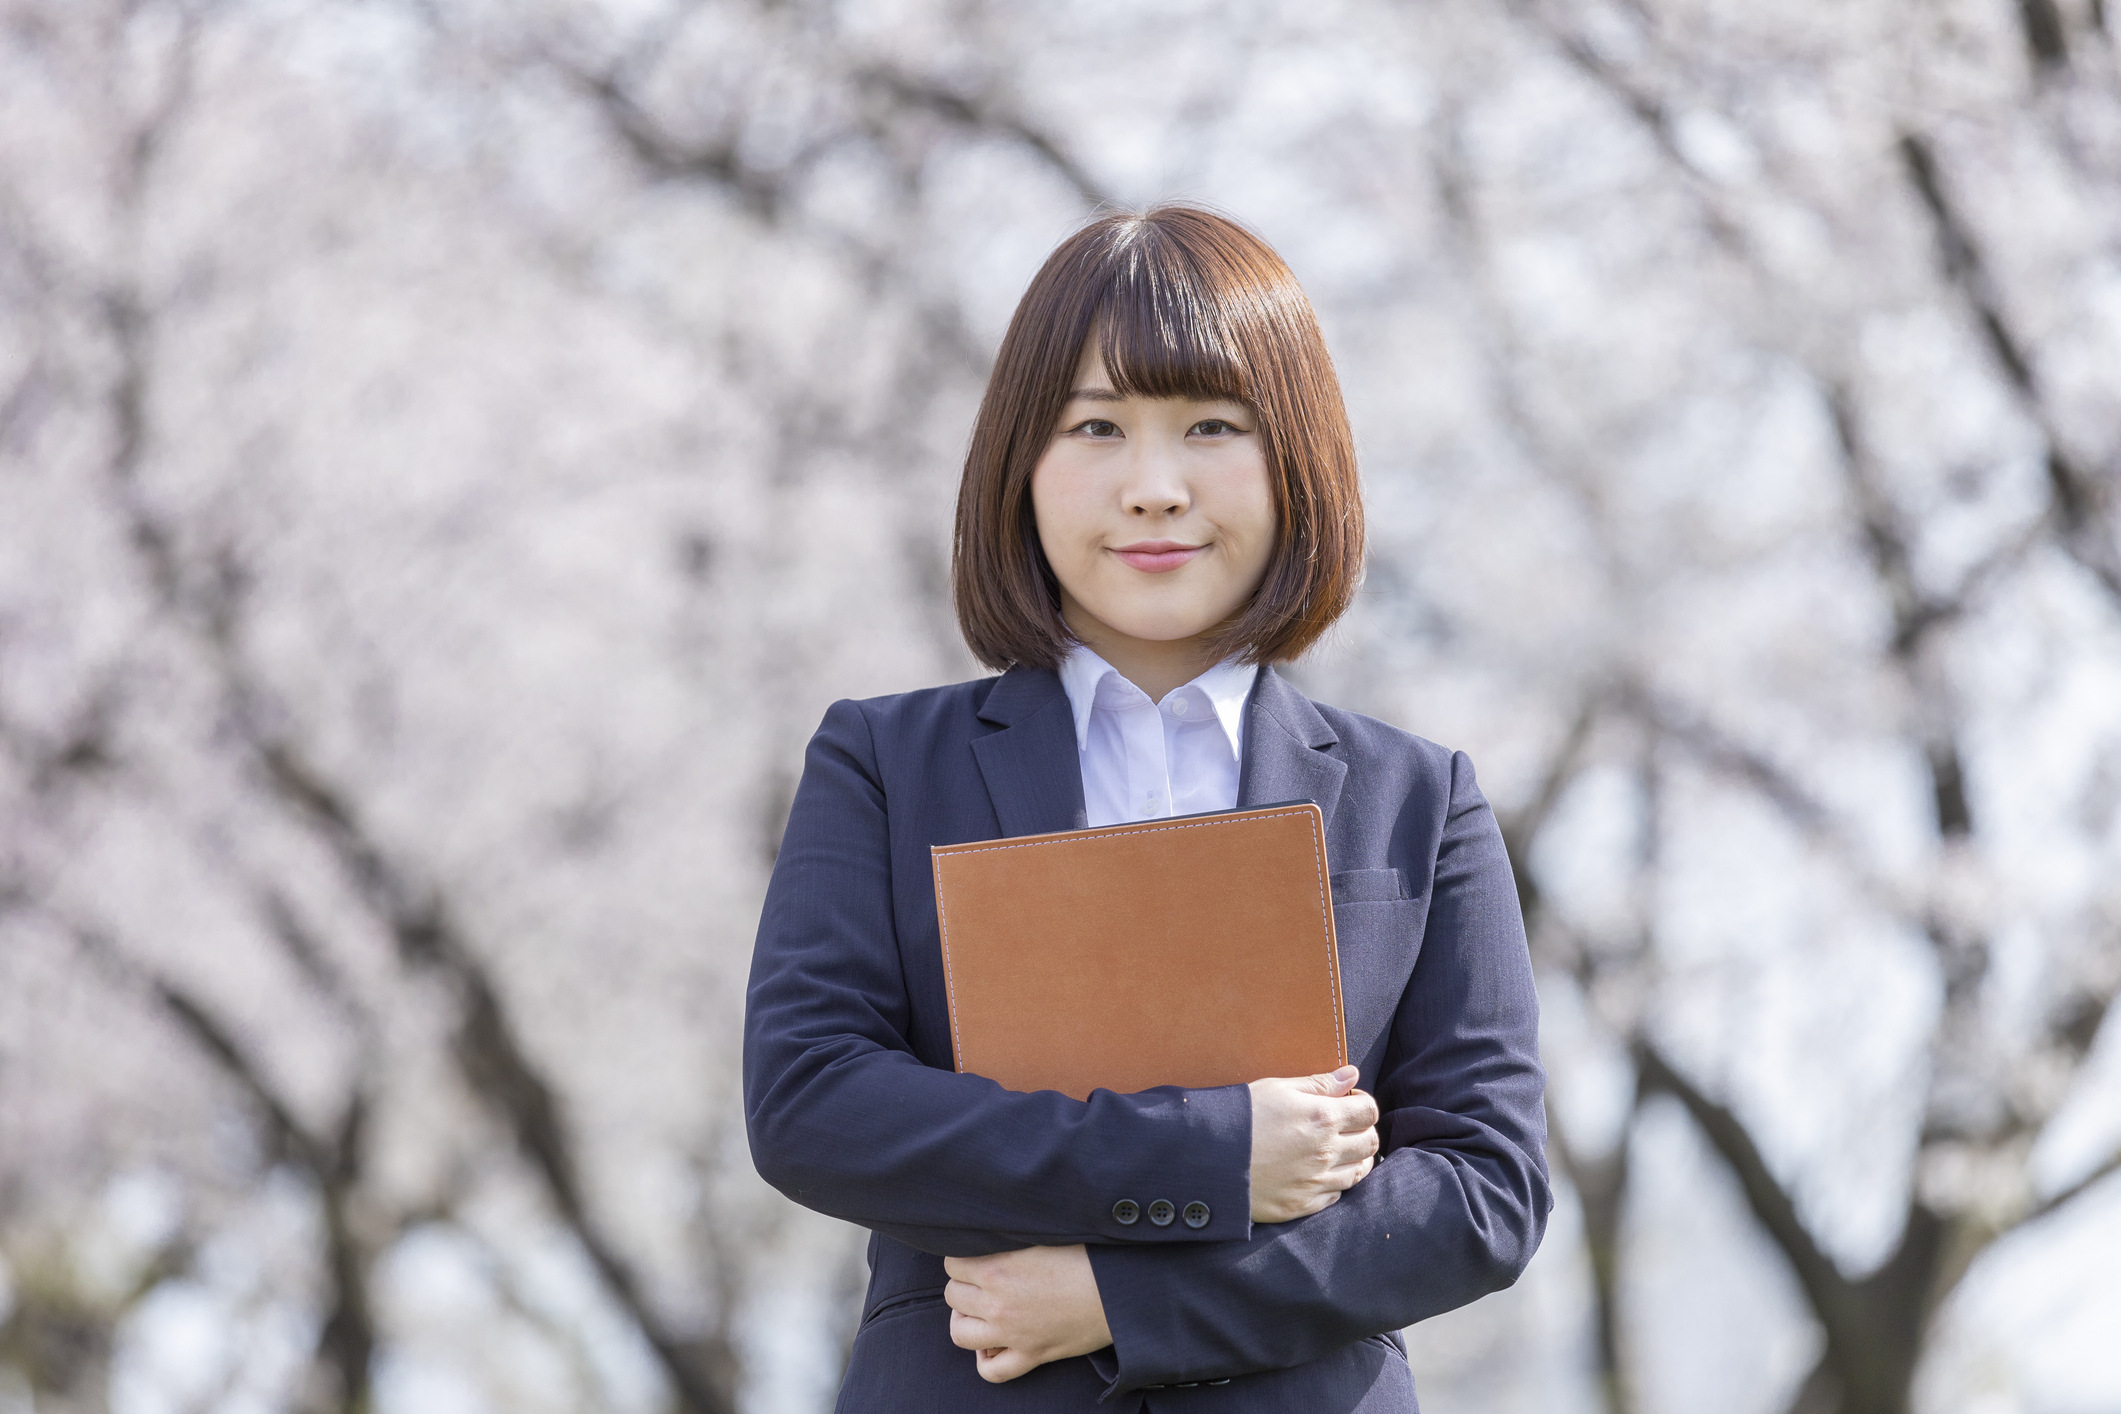 Woman in suit and cherry blossom